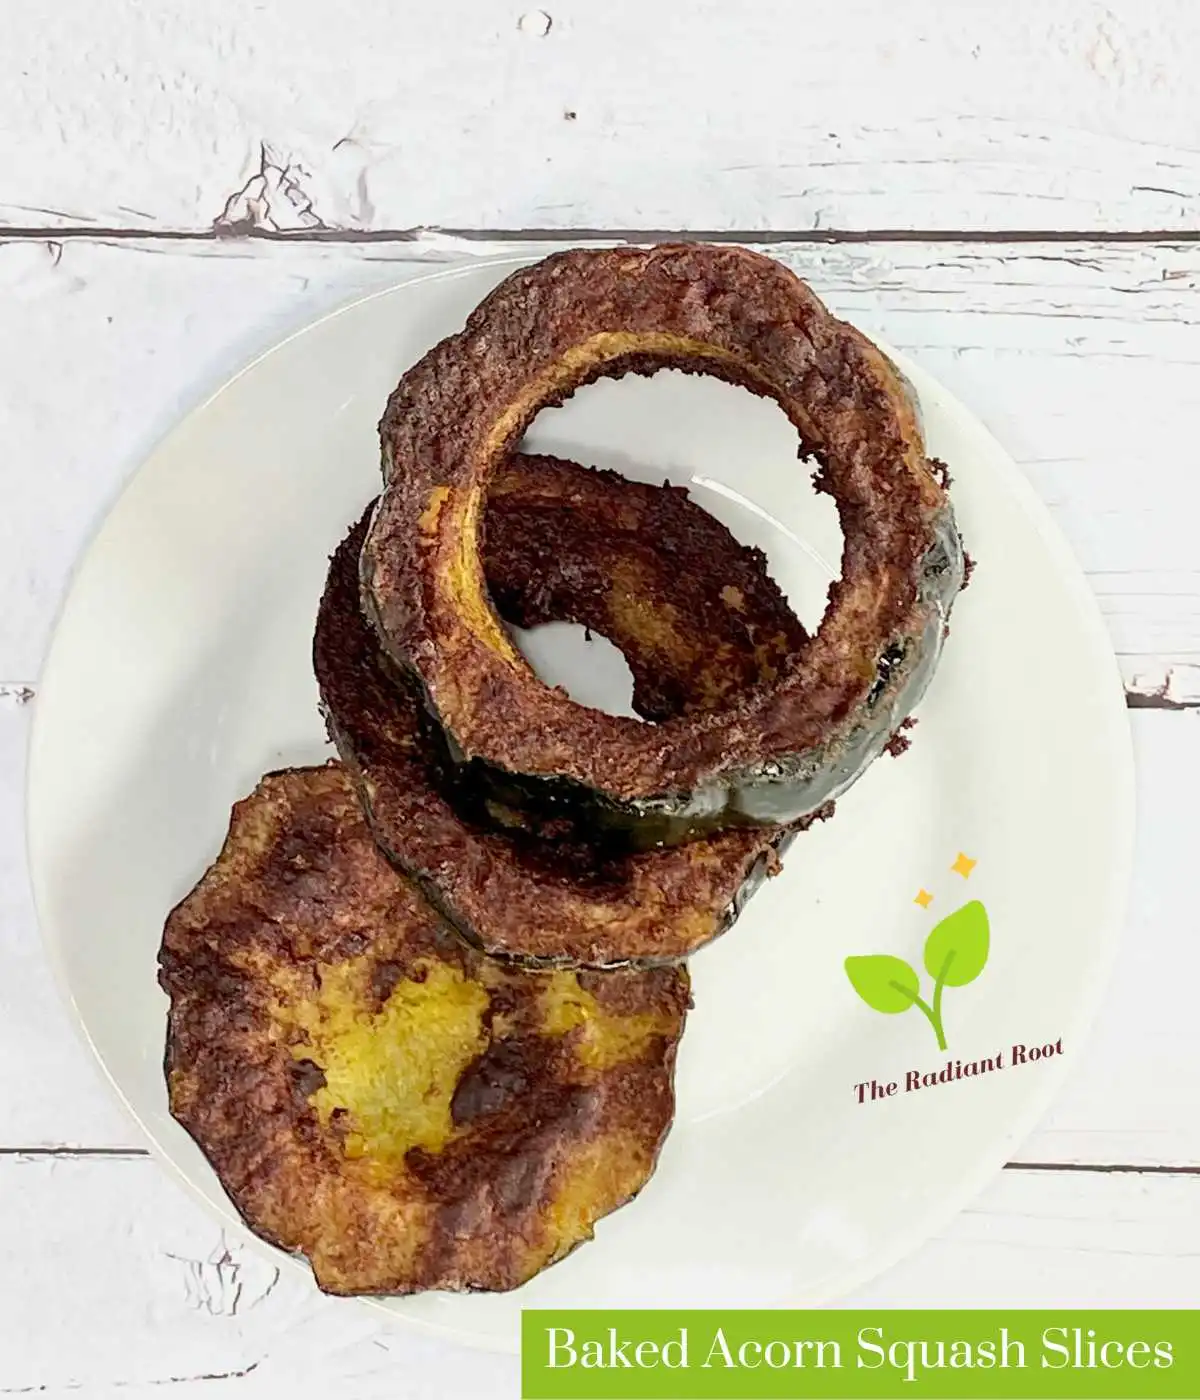 A white wooden table with a white plate with cooked acorn squash rings and the words “Baked Acorn Squash Slices.” | Baked Acorn Squash Slices | The Radiant Root